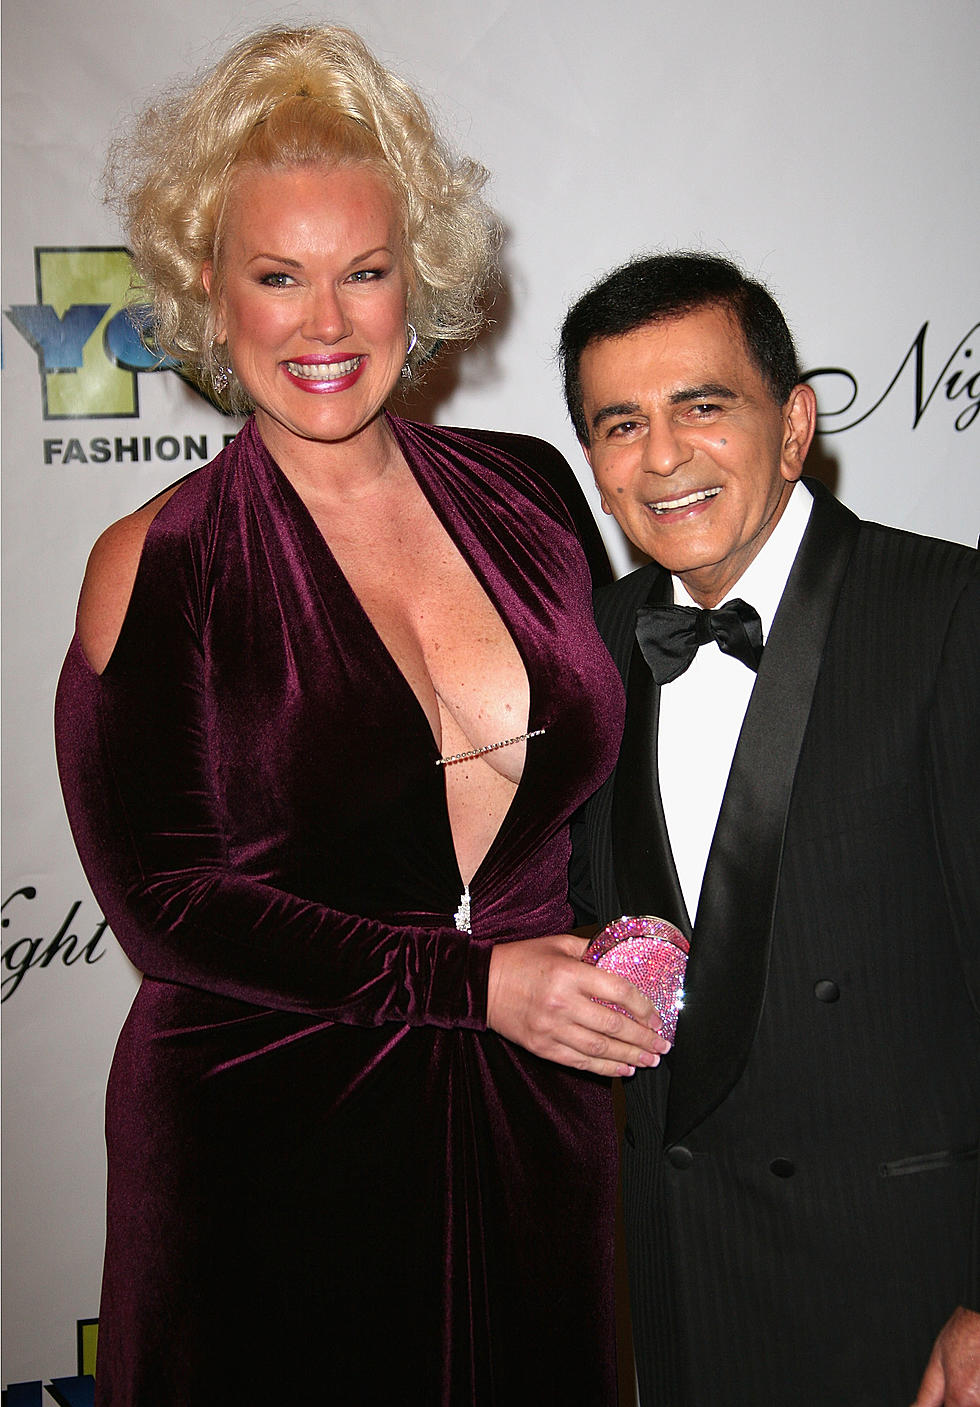 Casey Kasem Missing; Investigators Looking Into Whereabouts